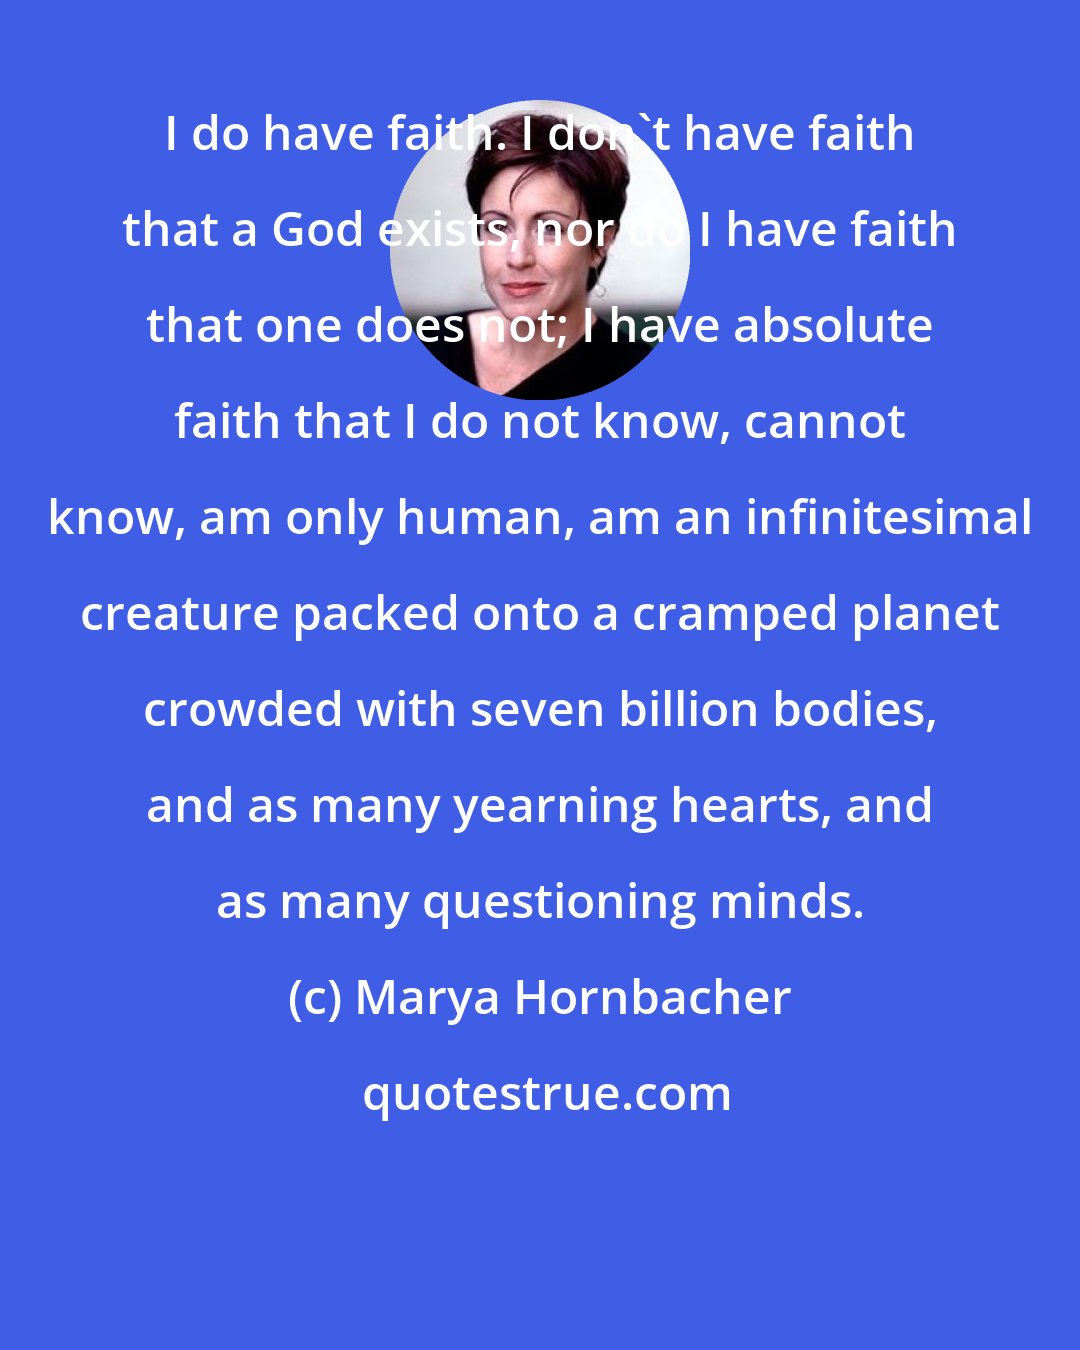 Marya Hornbacher: I do have faith. I don't have faith that a God exists, nor do I have faith that one does not; I have absolute faith that I do not know, cannot know, am only human, am an infinitesimal creature packed onto a cramped planet crowded with seven billion bodies, and as many yearning hearts, and as many questioning minds.